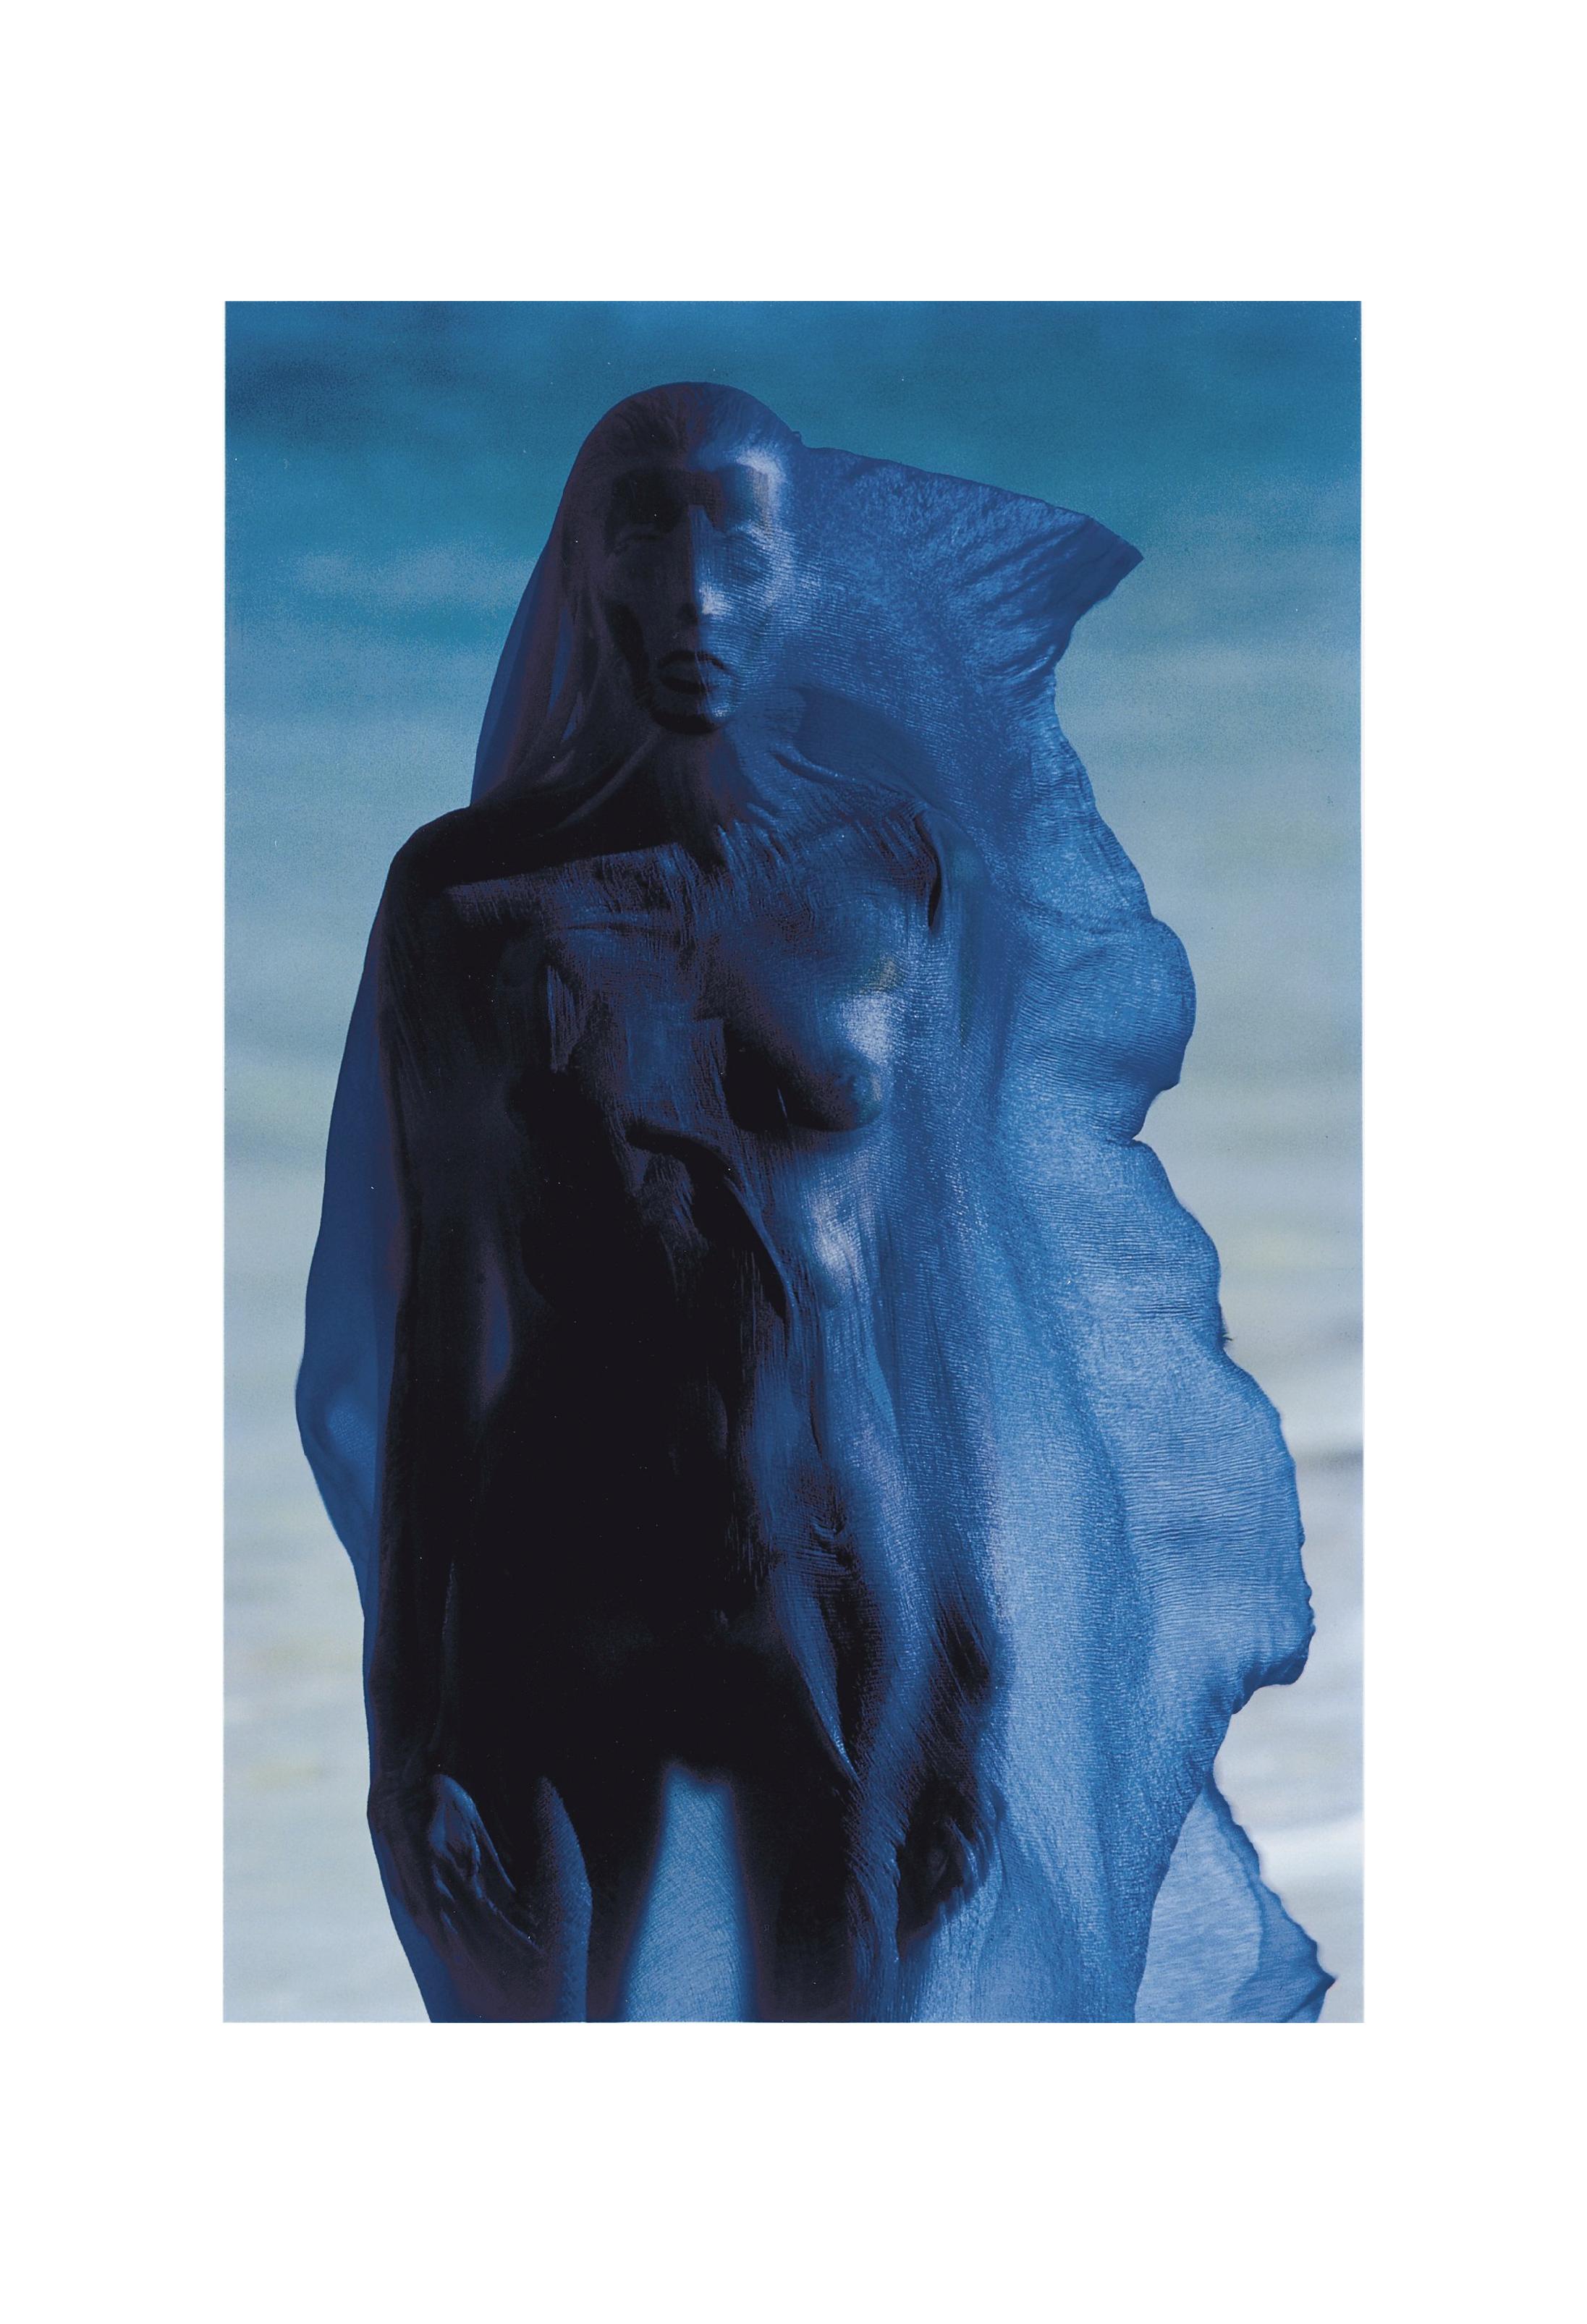 Hans Feurer curated a Set  of 11 Dye Transfer Prints
order 

1-  